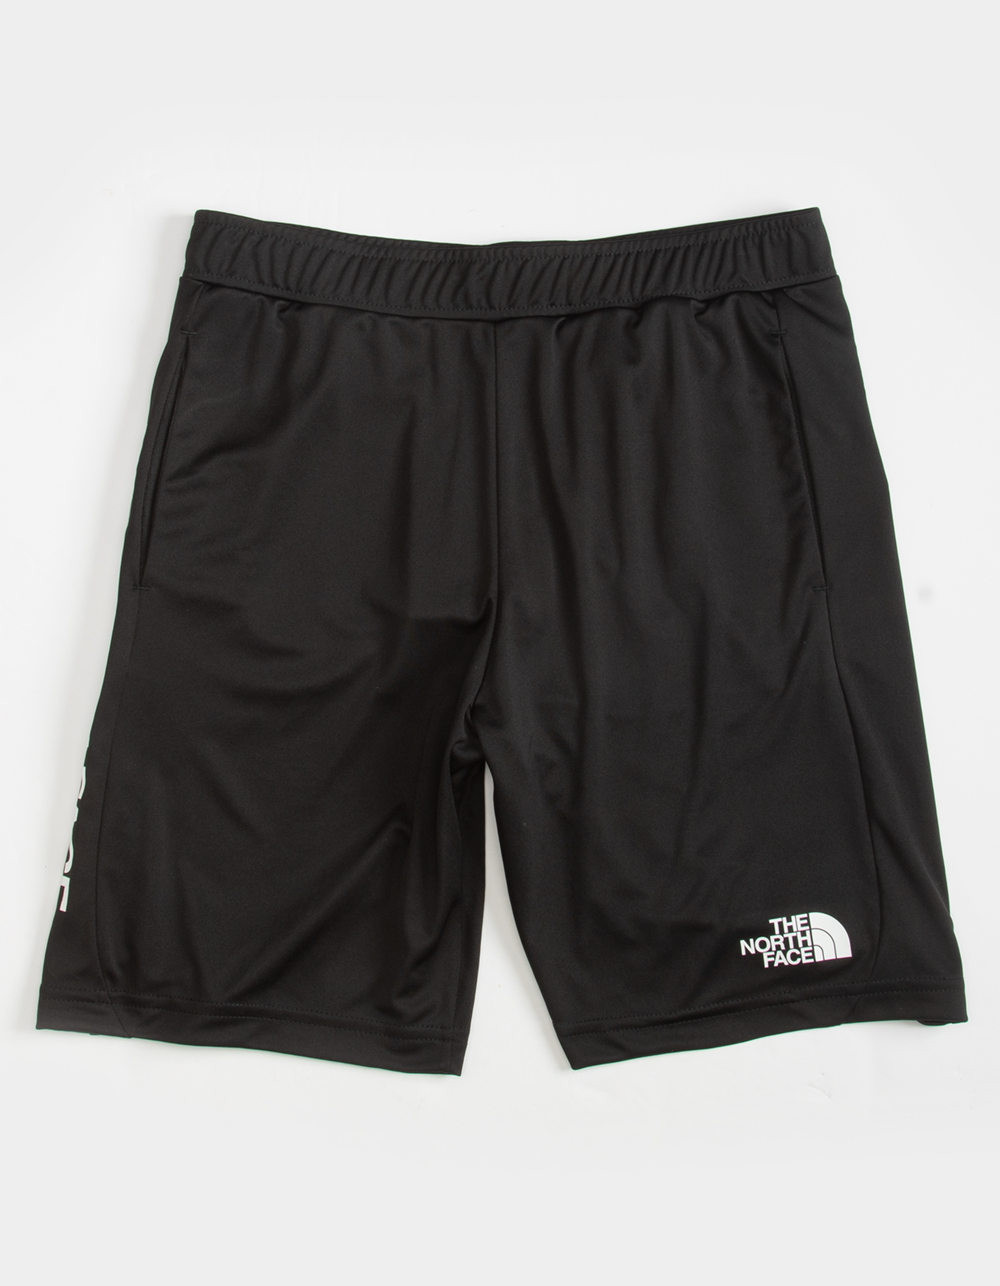 THE NORTH FACE Never Stop Boys Shorts - BLACK | Tillys